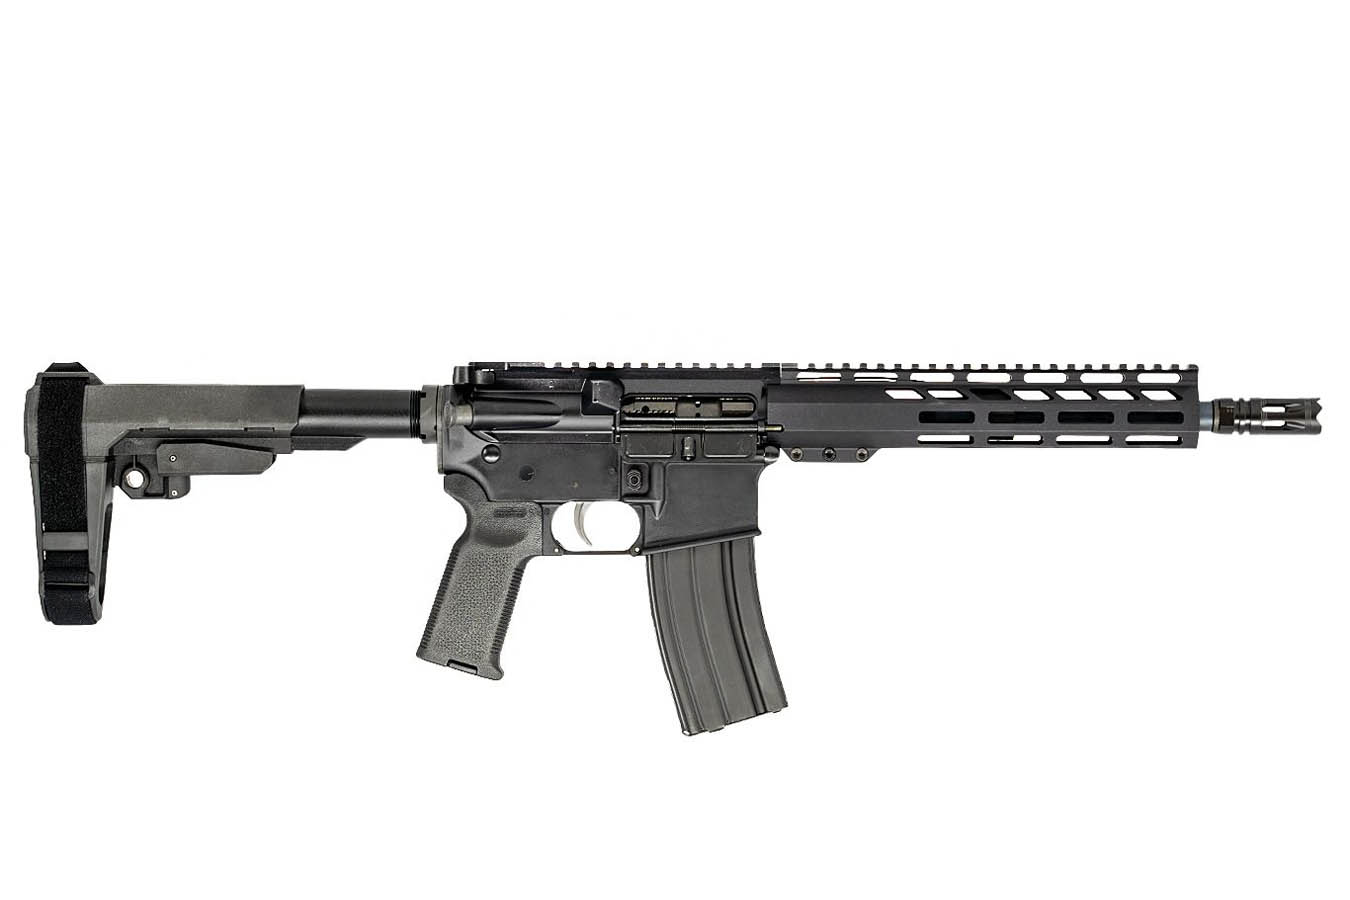 ANDERSON MANUFACTURING AM-15 .300 Blackout AR-15 Pistol with 10.5 Inch Barrel and M-LOK Handguard